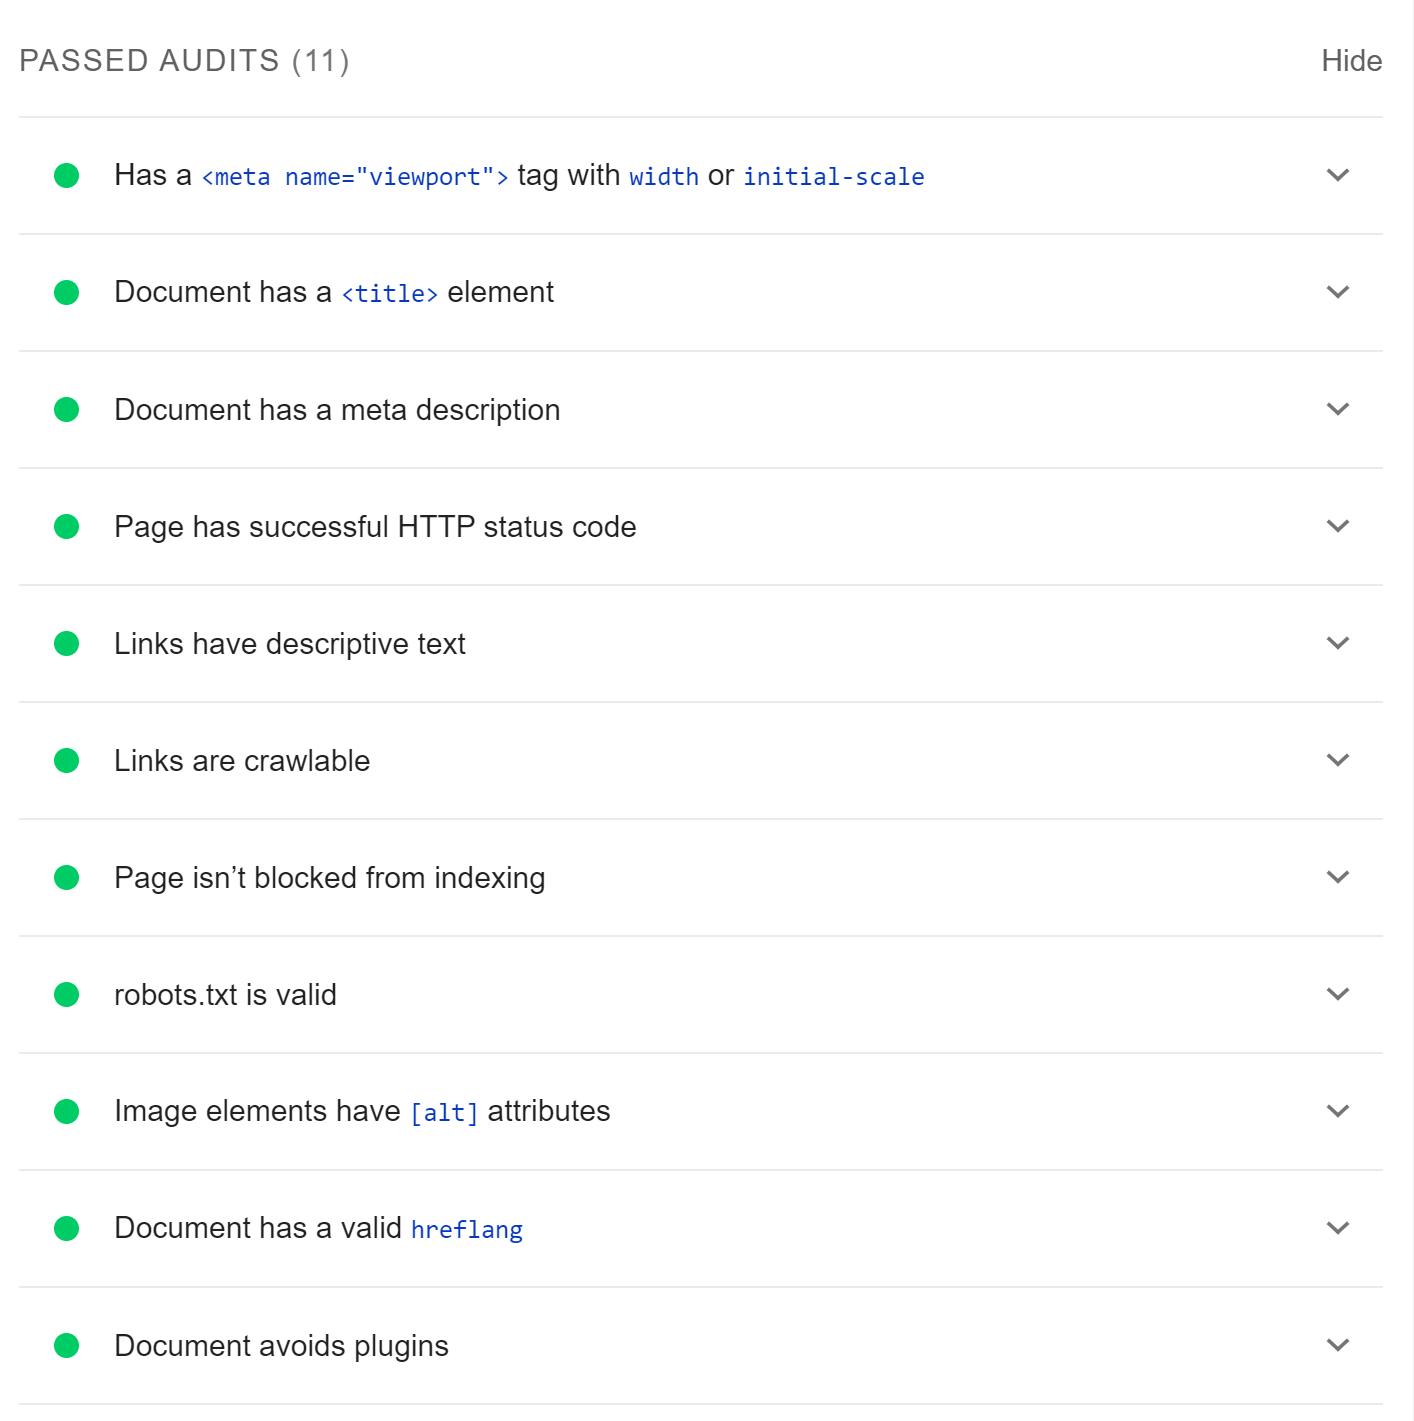 An expanded "Passed Audits" section from a Lighthouse SEO report that shows the following passed audits: has a <meta name = 'viewport'> tag with width or initial-scale; document has a <title> element; document has a meta description; page has successful HTTP status code; links have descriptive text; links are crawlable; page isn't blocked from indexing; robots.txt is valid; image elements have [alt] attributes; document has a valid hreflang; document avoids plugins.